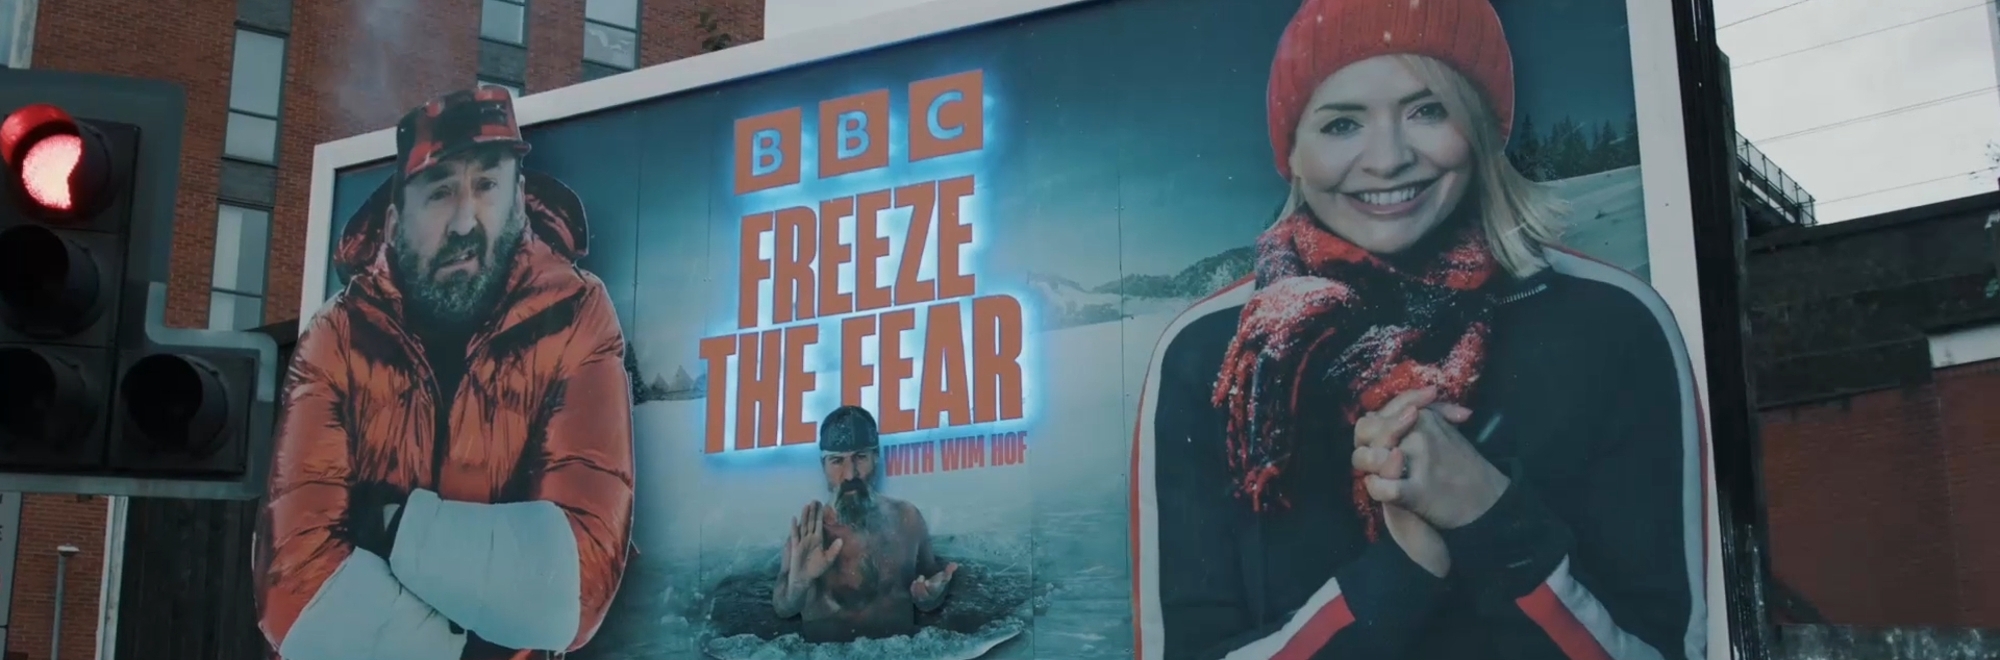 Shivering billboard unveiled in Salford for Wim Hof’s new BBC One show